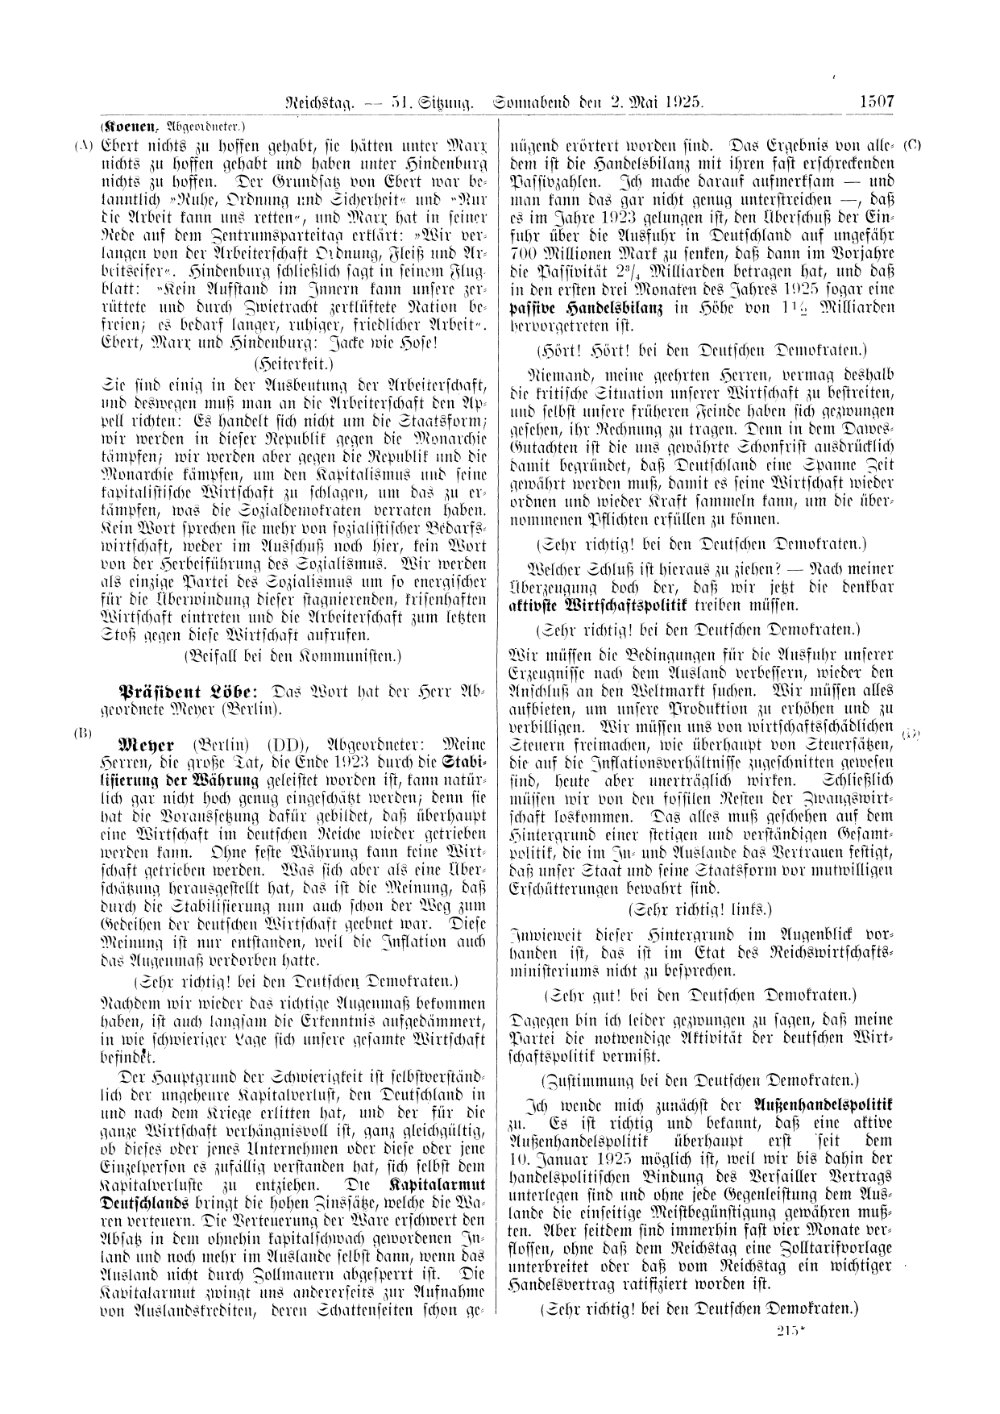 Scan of page 1507